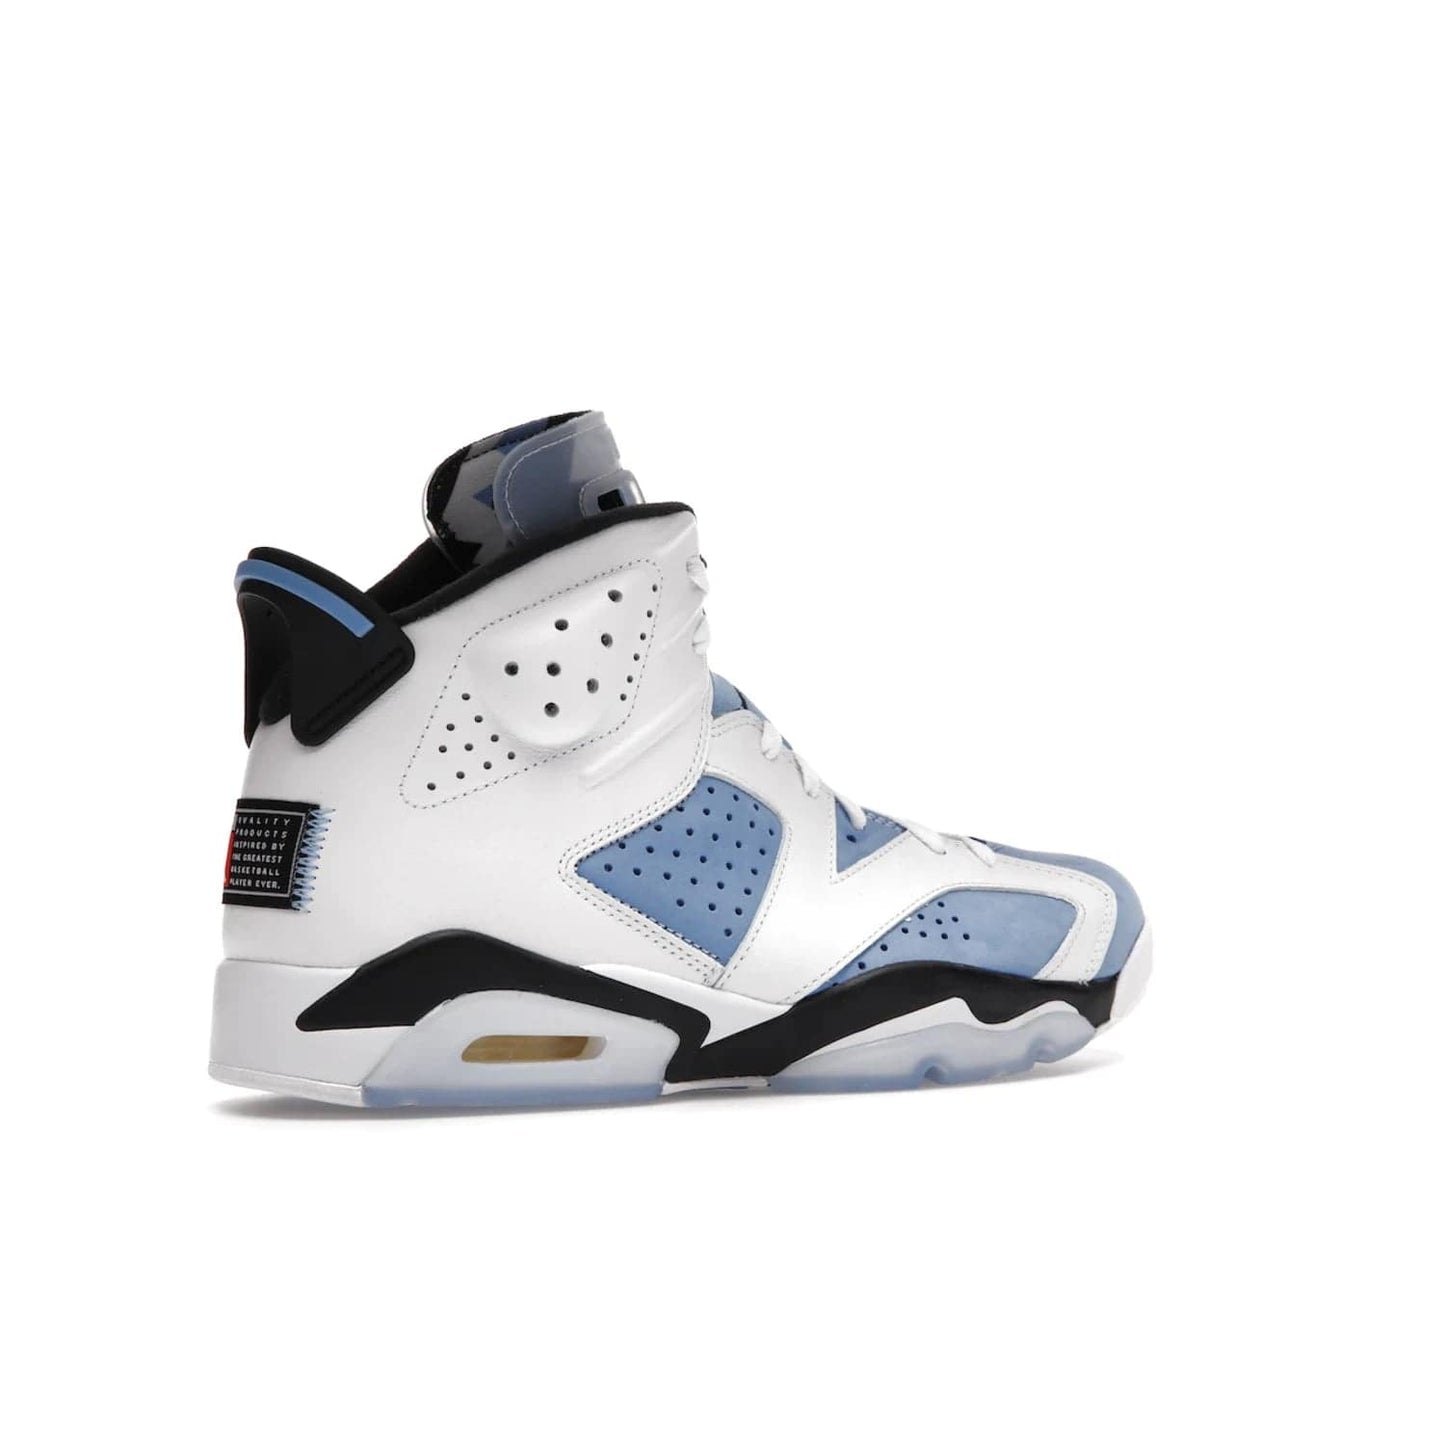 Jordan 6 Retro UNC White - Image 34 - Only at www.BallersClubKickz.com - Air Jordan 6 Retro UNC White with classic UNC colors brings nostalgia and style to a legendary silhouette. Celebrate MJ's alma mater with navy blue accents, icy semi-translucent sole and Jordan Team patch. Out March 2022 for the Sneaker Enthusiast.